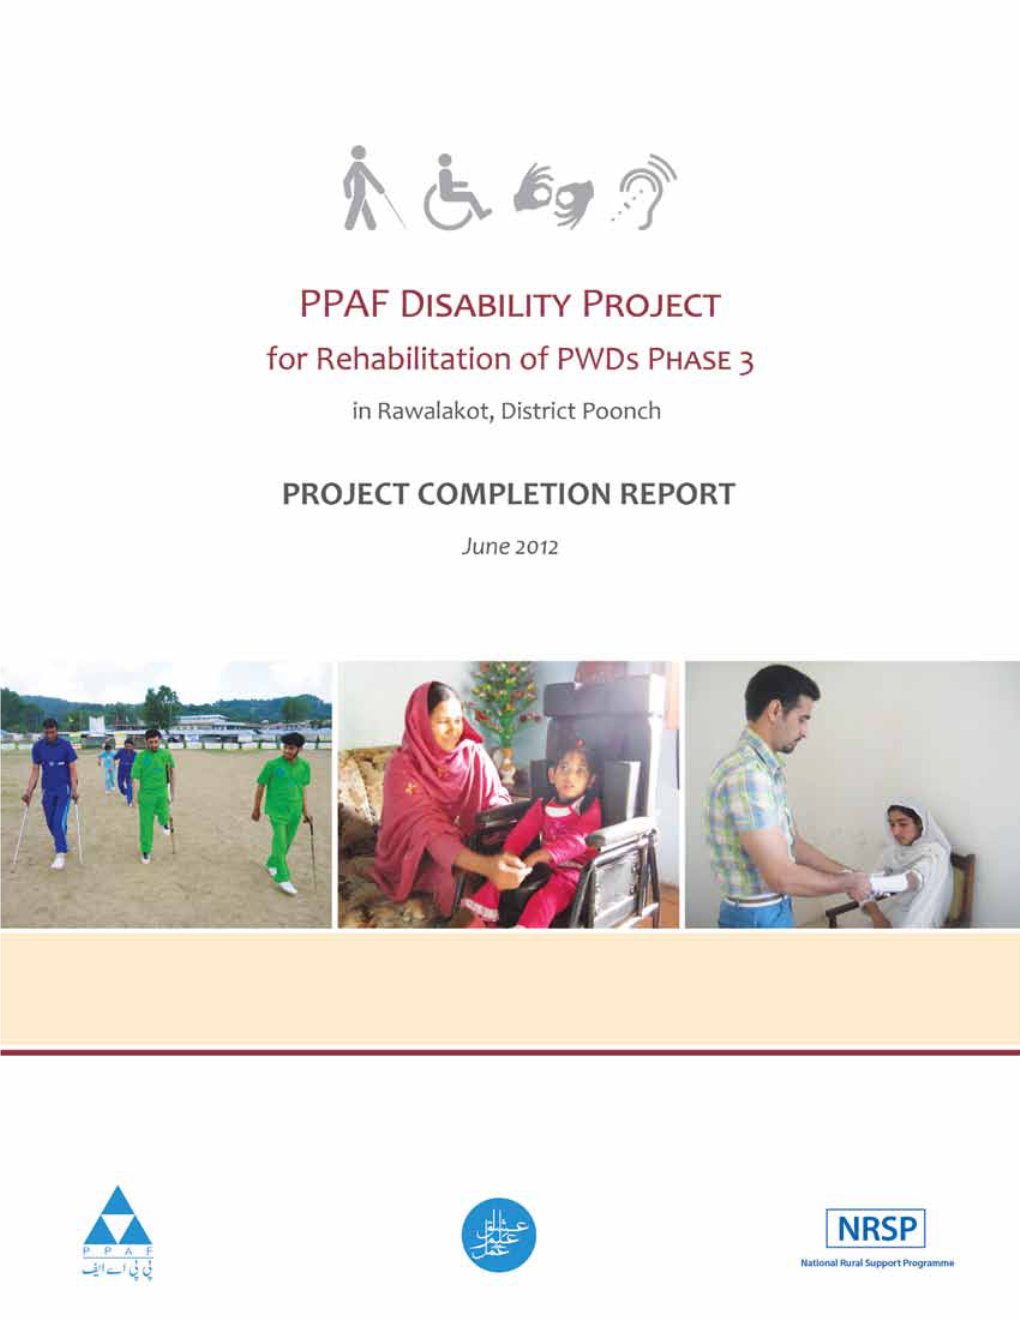 PPAF Disability Project Phase 3